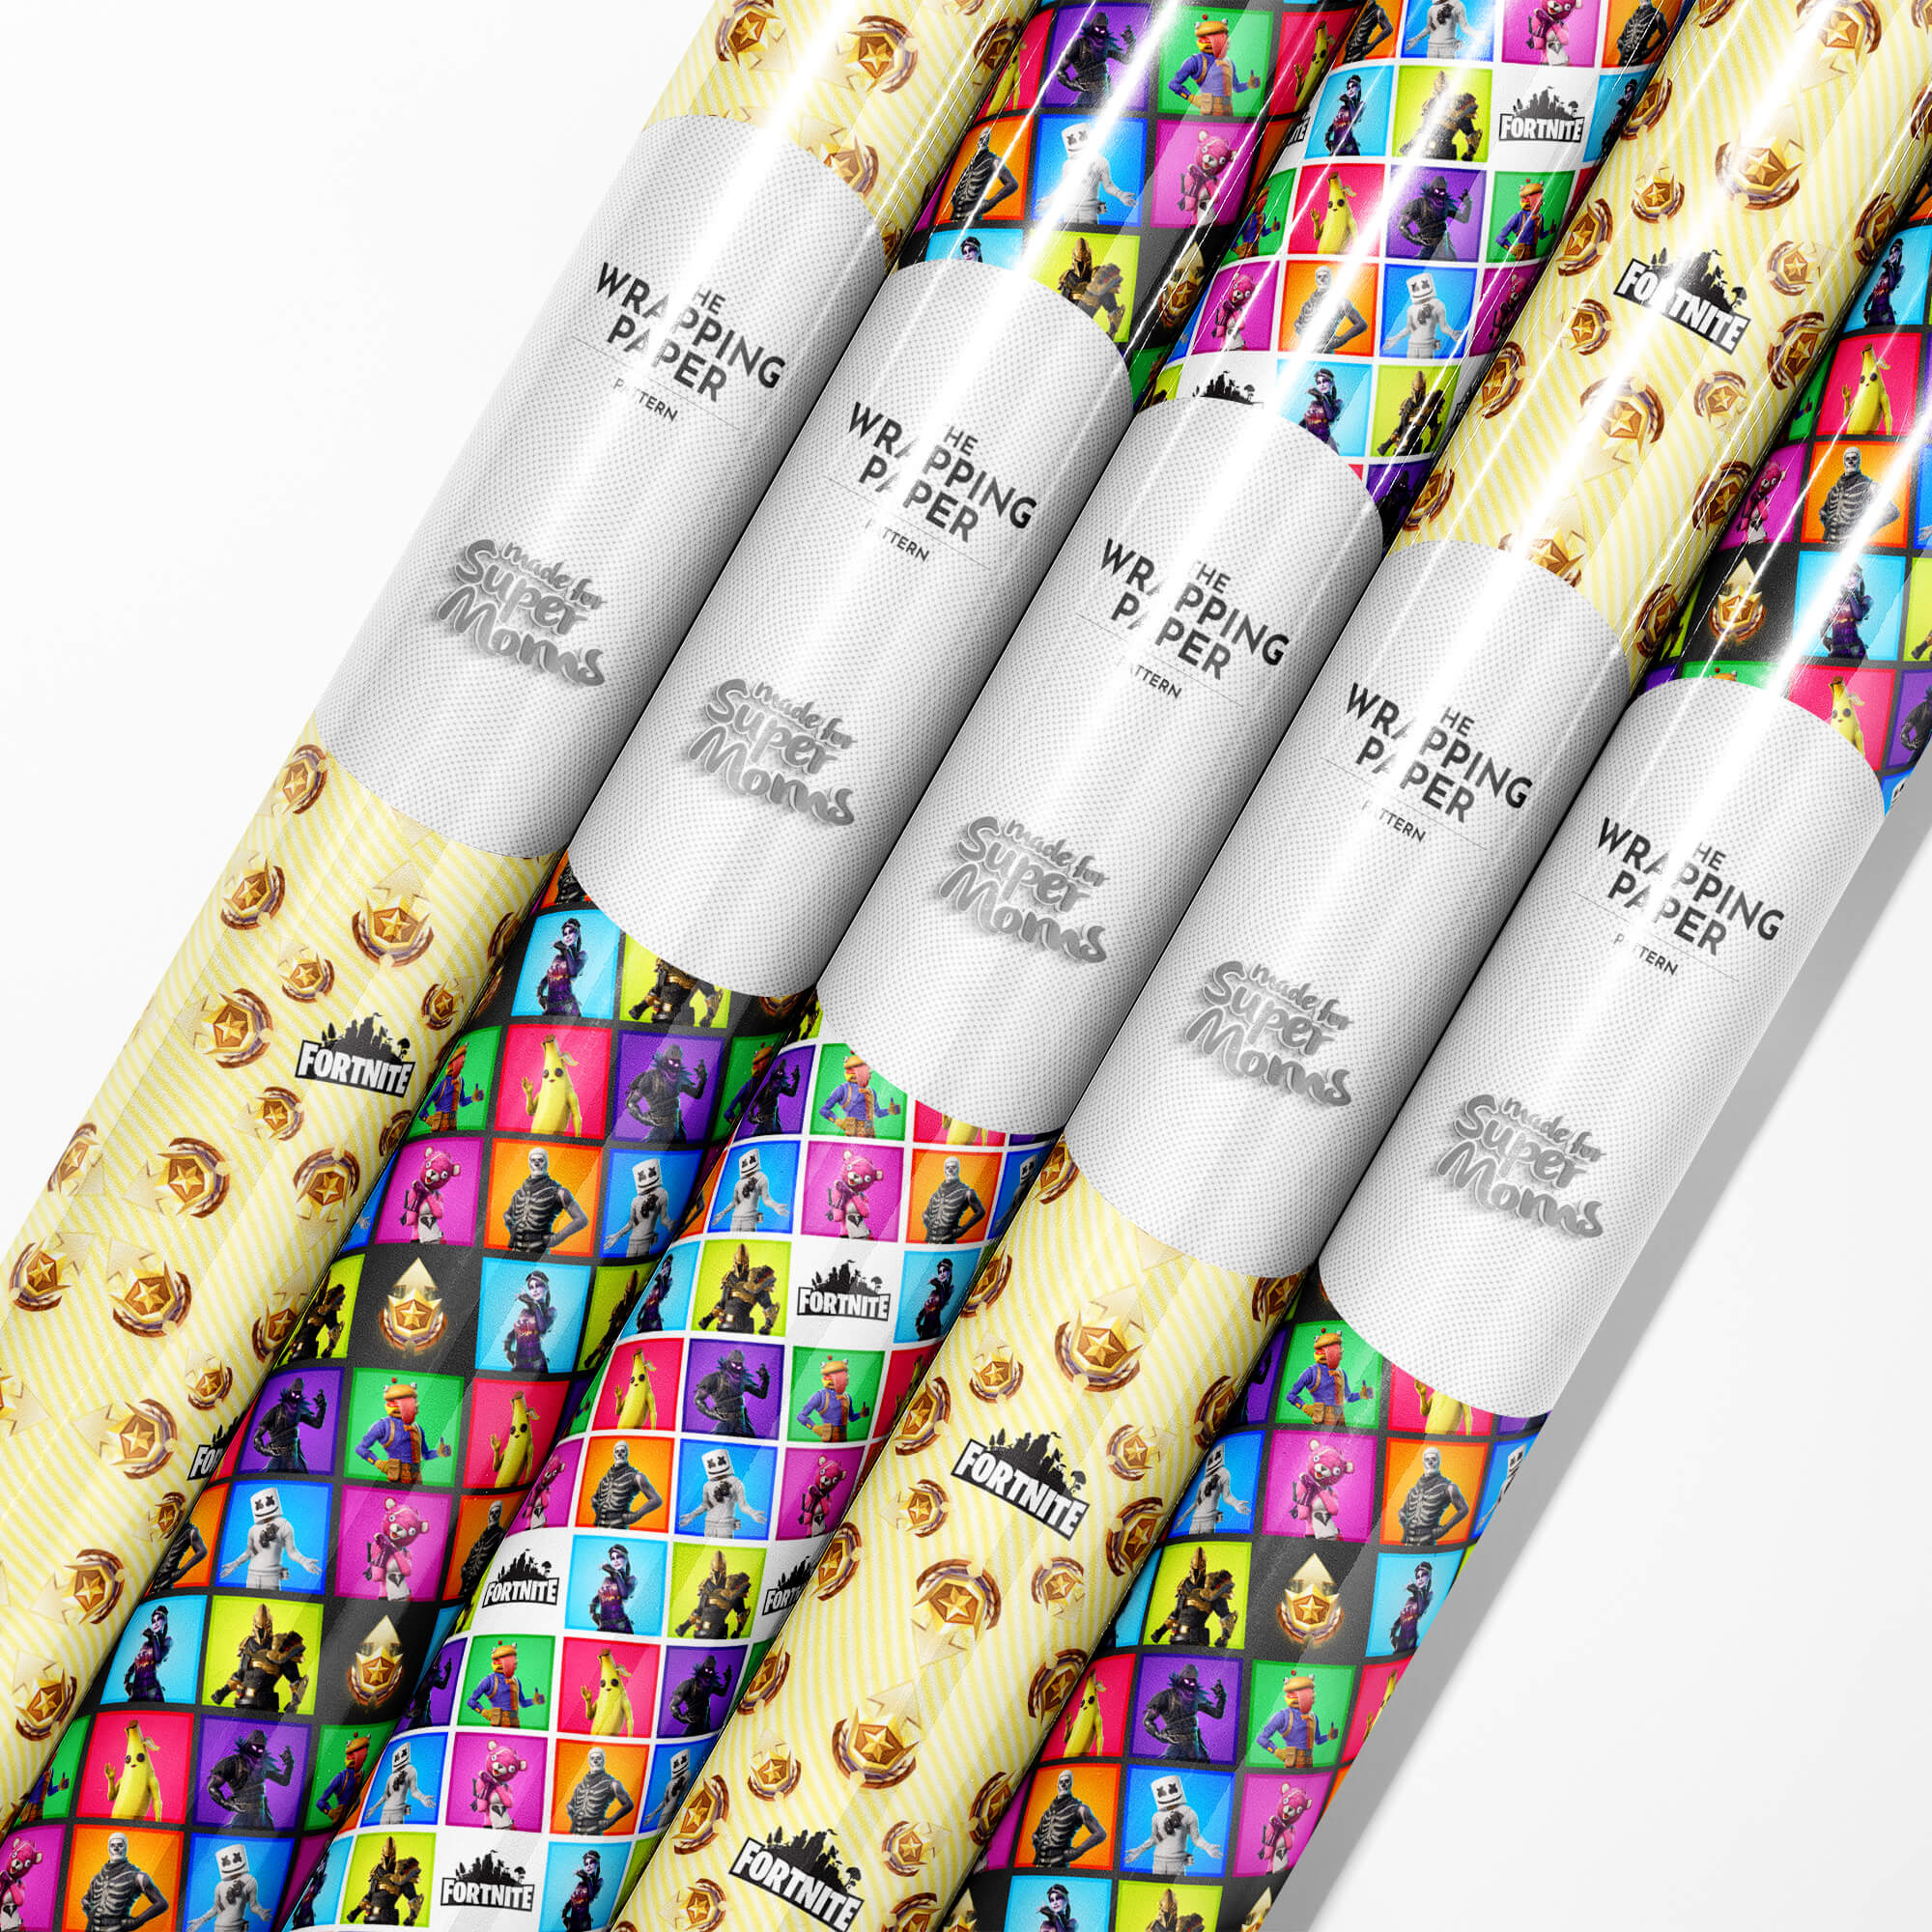 Roblox Wrapping Paper - PimpYourWorld Birthday Party Supplies